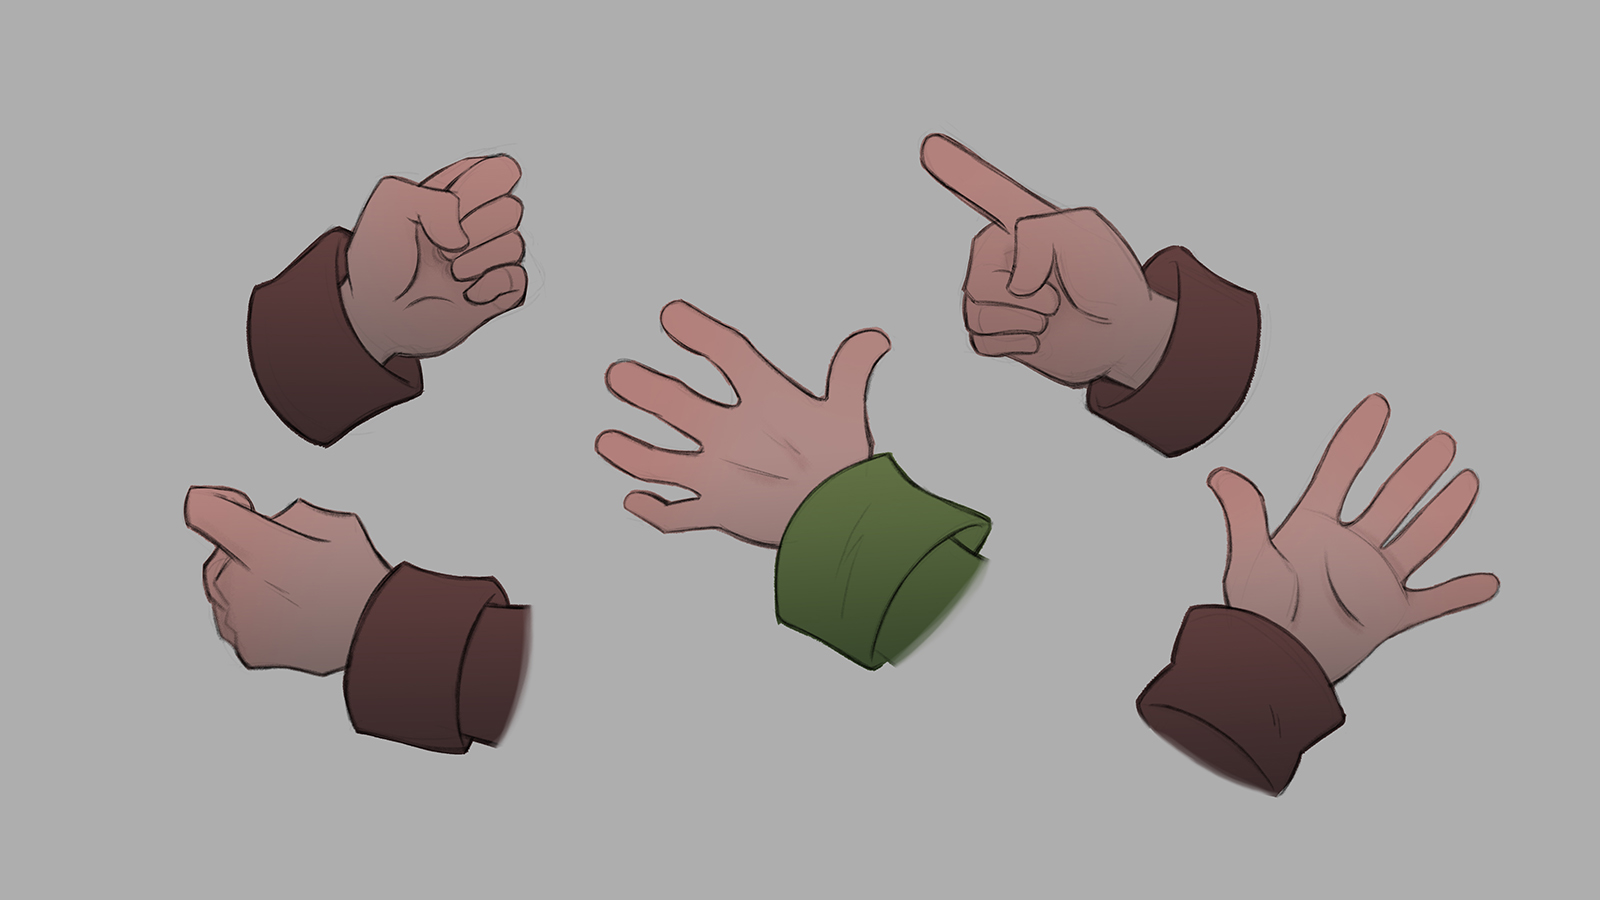 Several examples of the detective's hands from multiple angles.